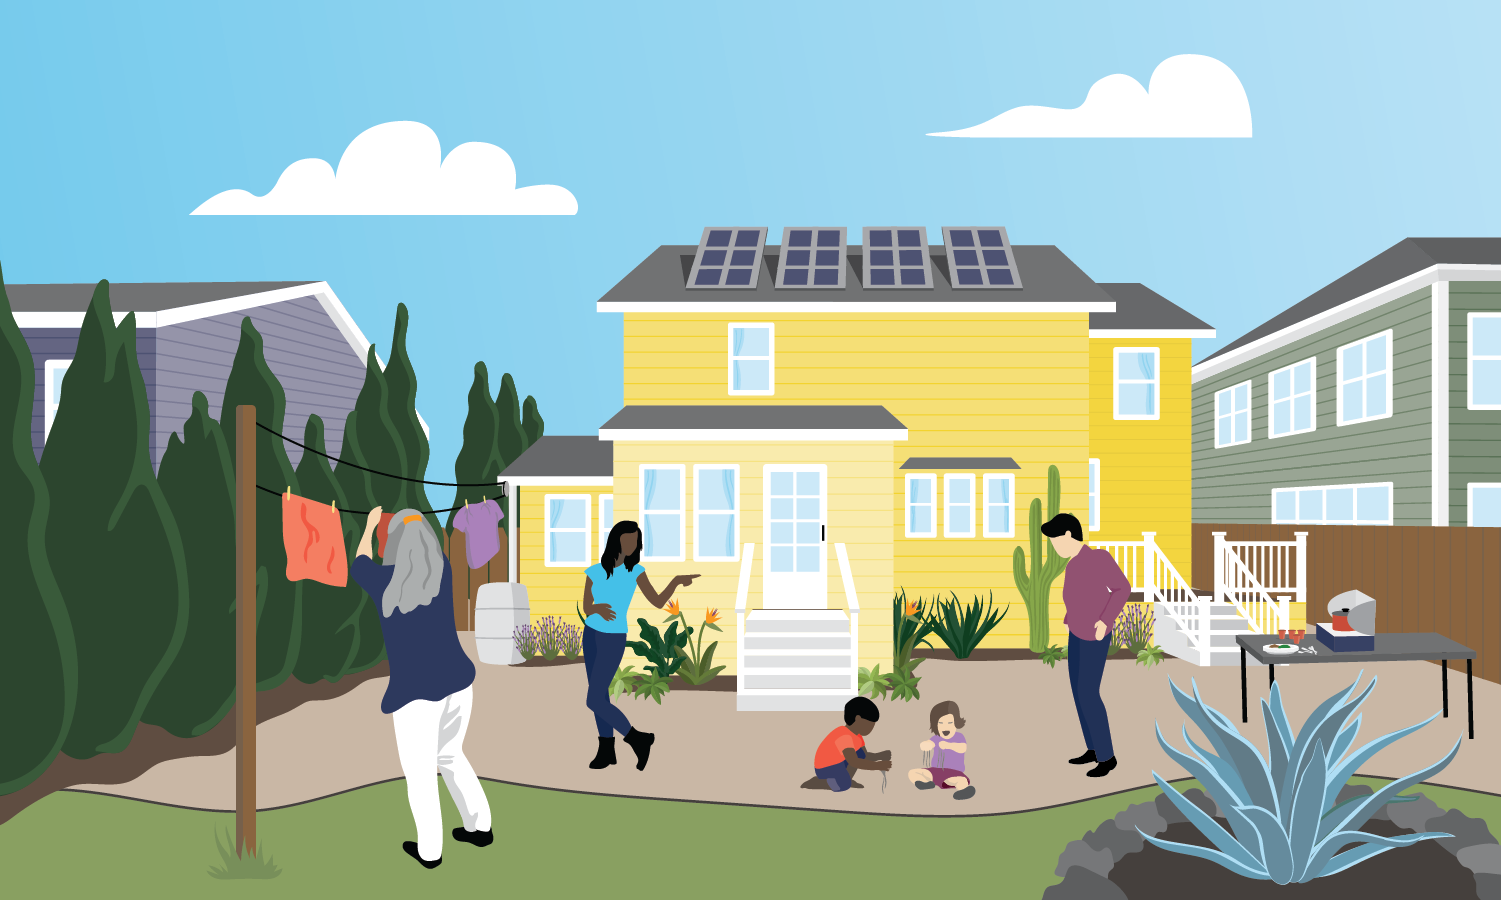 Illustration of yellow two-story house with solar PV array on roof. A family with two children are playing in the front yard while a woman with grey hair hangs laundry.